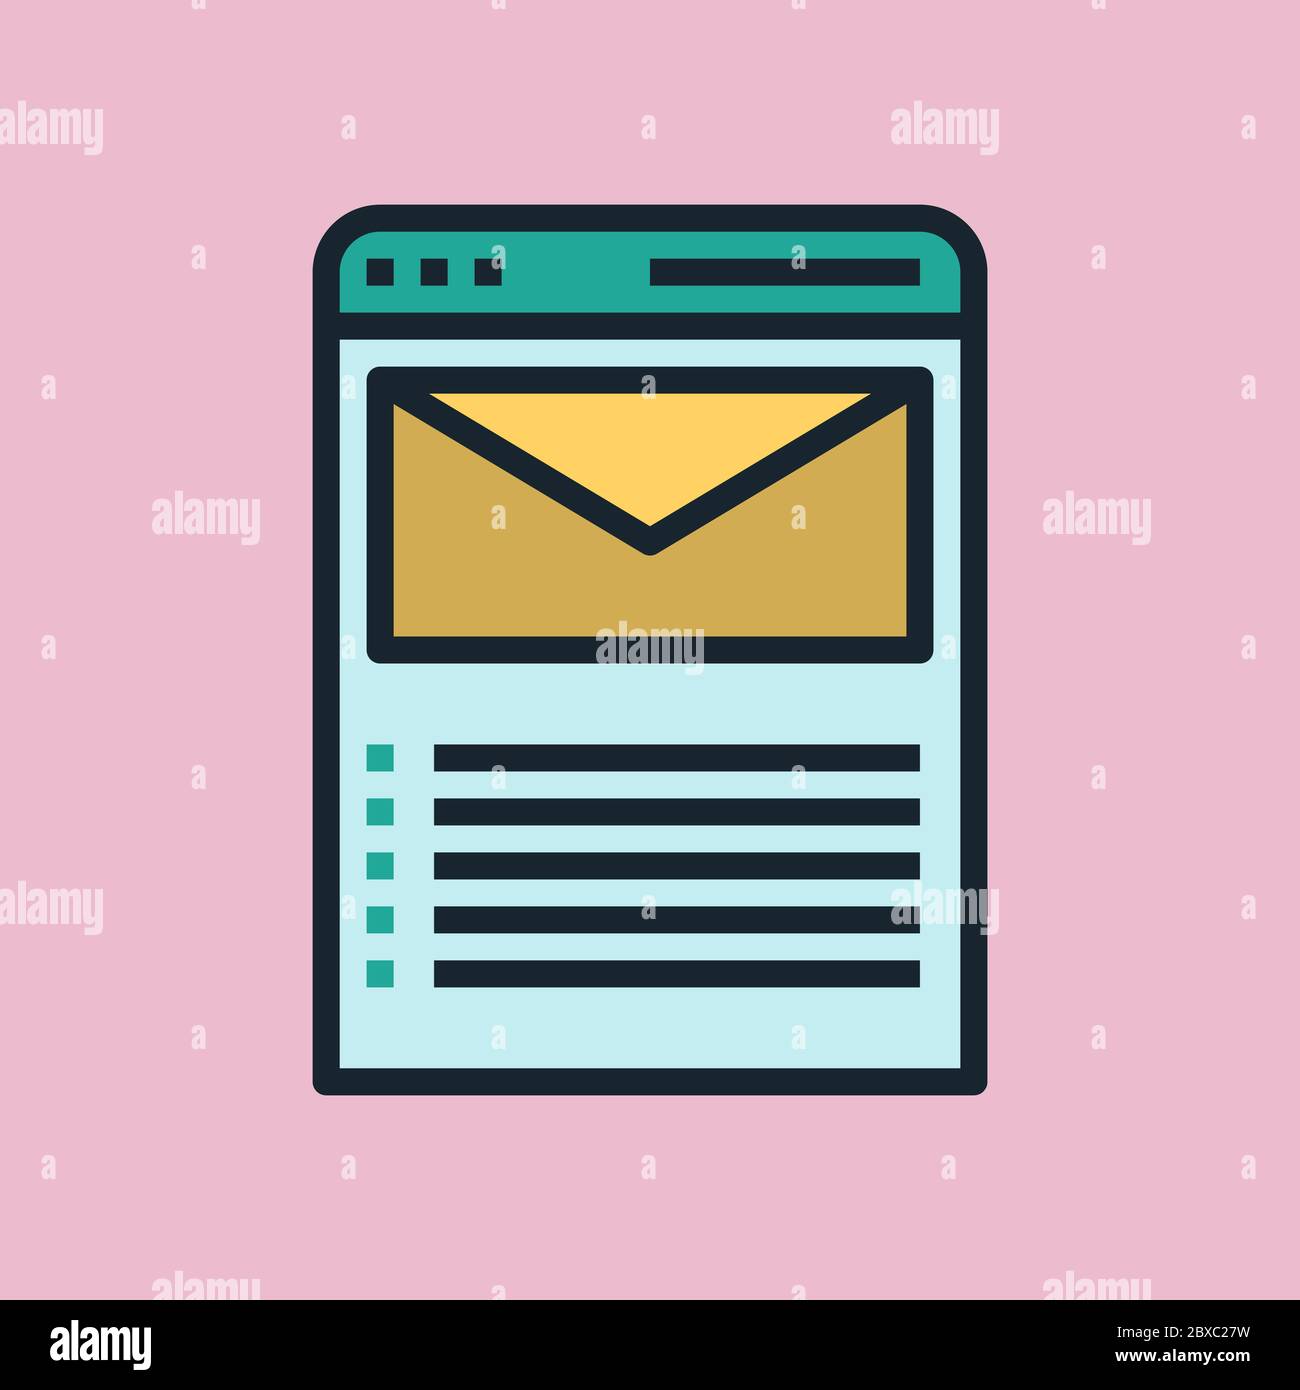 Email List. Digital marketing concept illustration, flat design linear style banner. Usage for e-mail newsletters, headers, blog posts, print and more Stock Vector